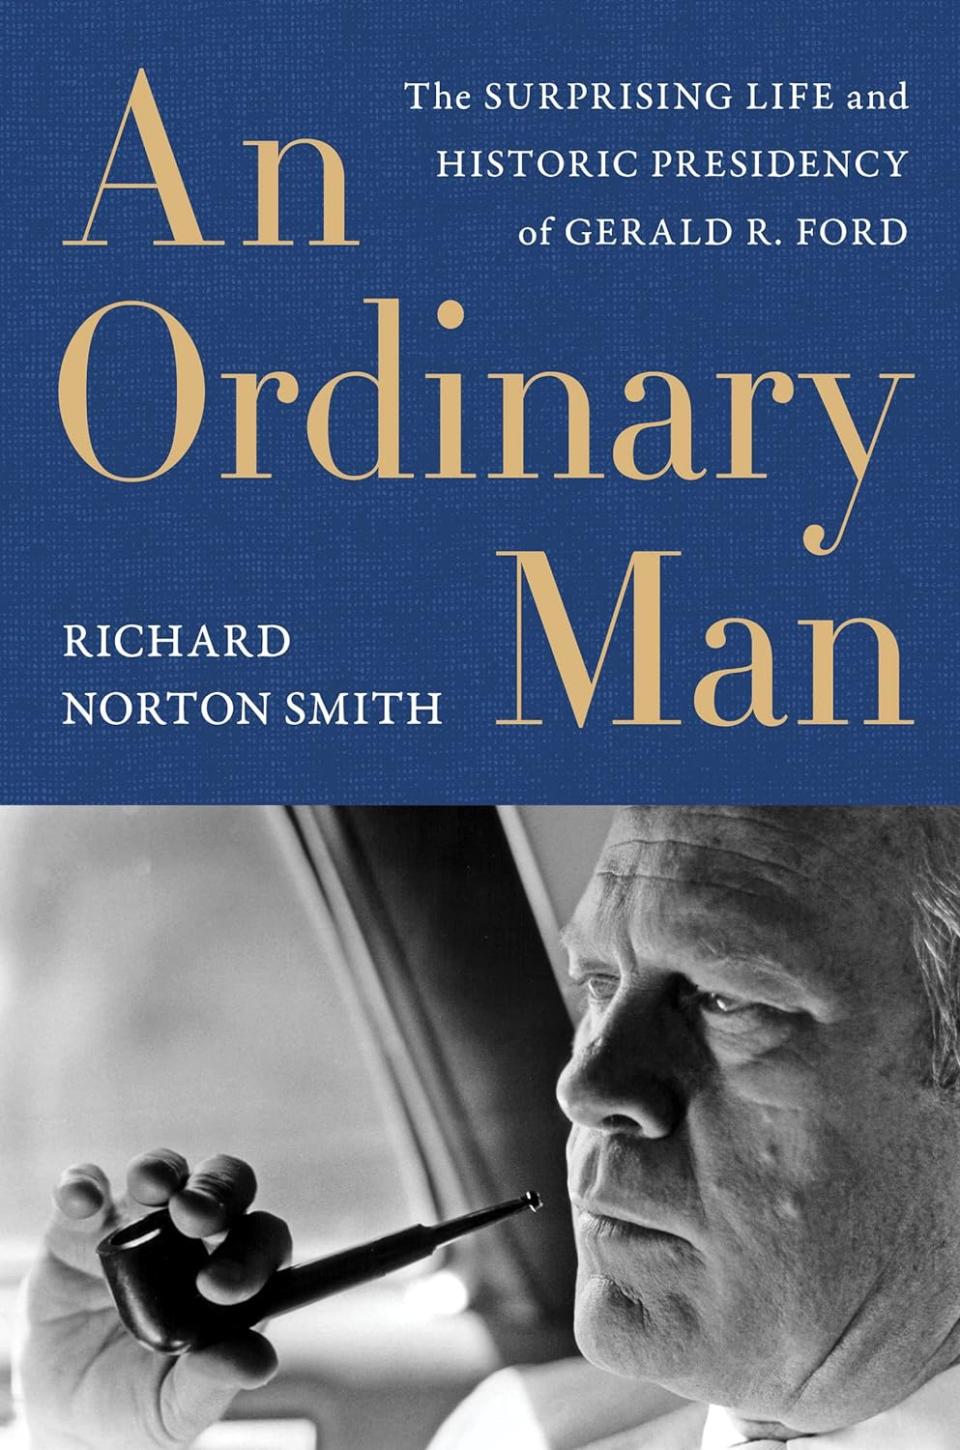 "An Ordinary Man: The Surprising Life and Historic Presidency of Gerald R. Ford"